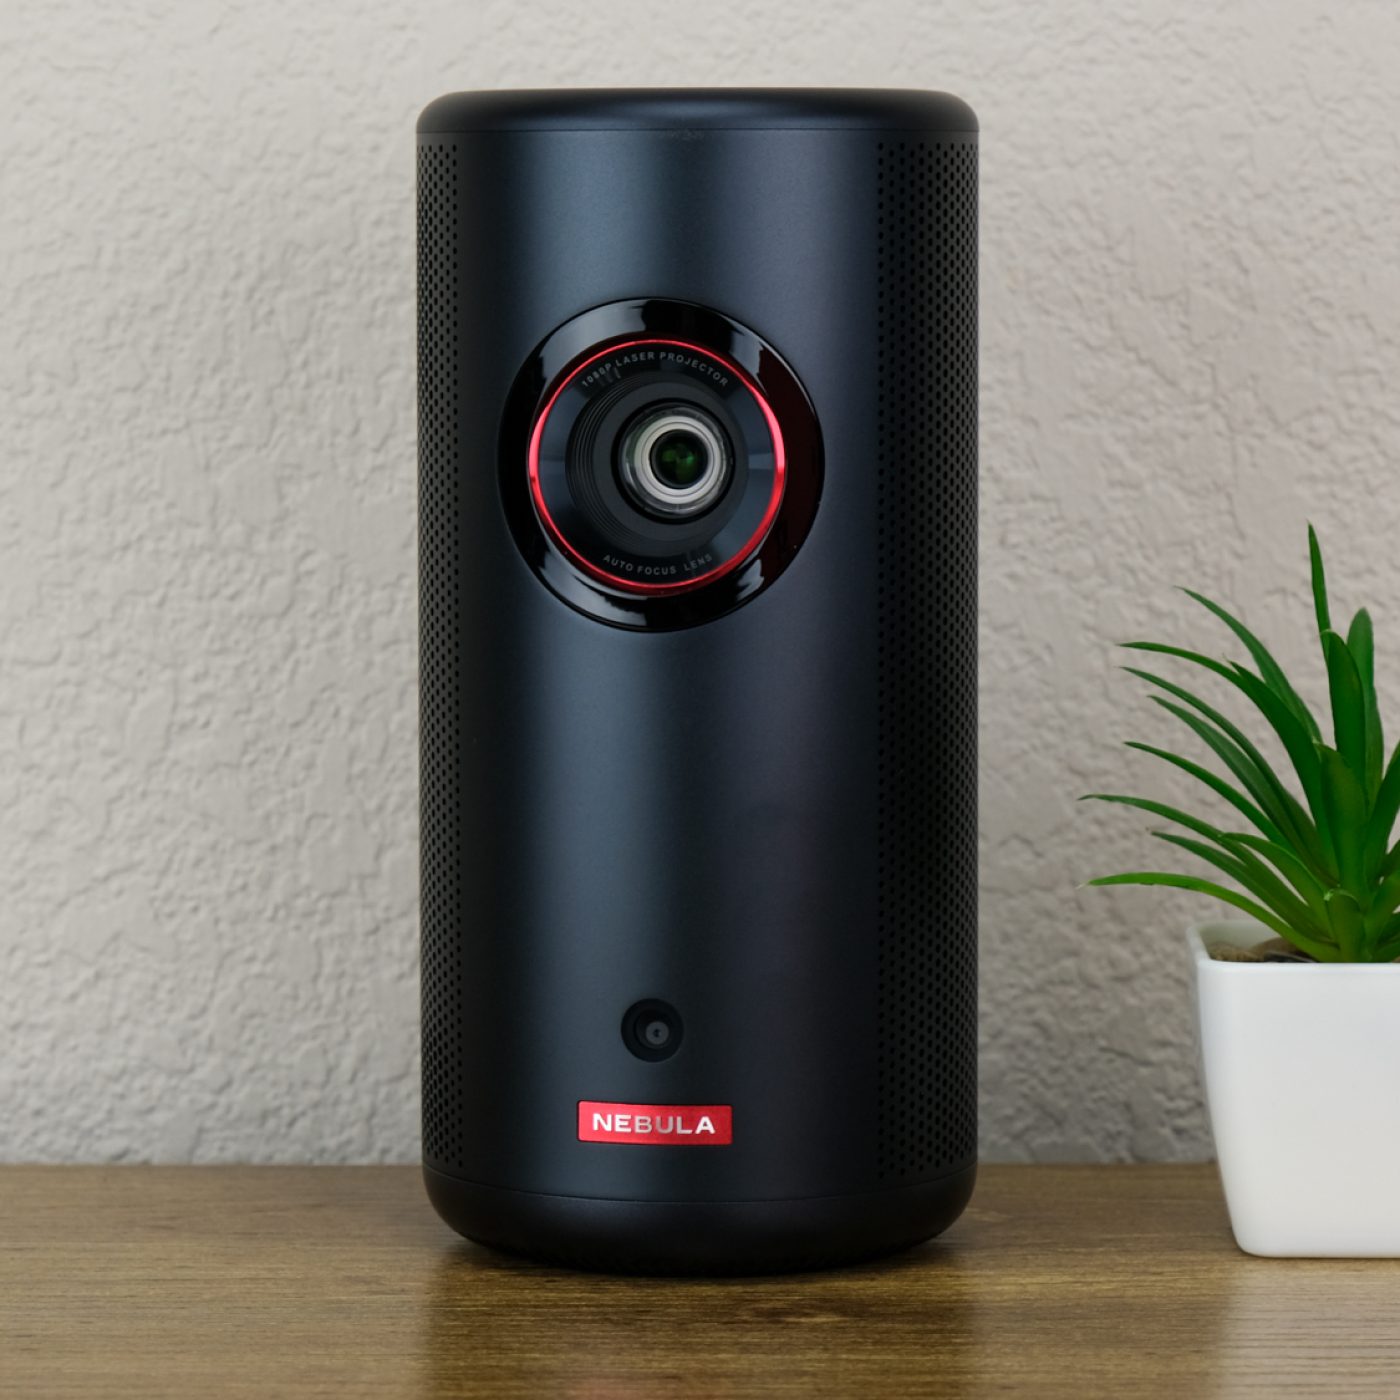 Anker Nebula Capsule 3 laser projector review: Good for the size